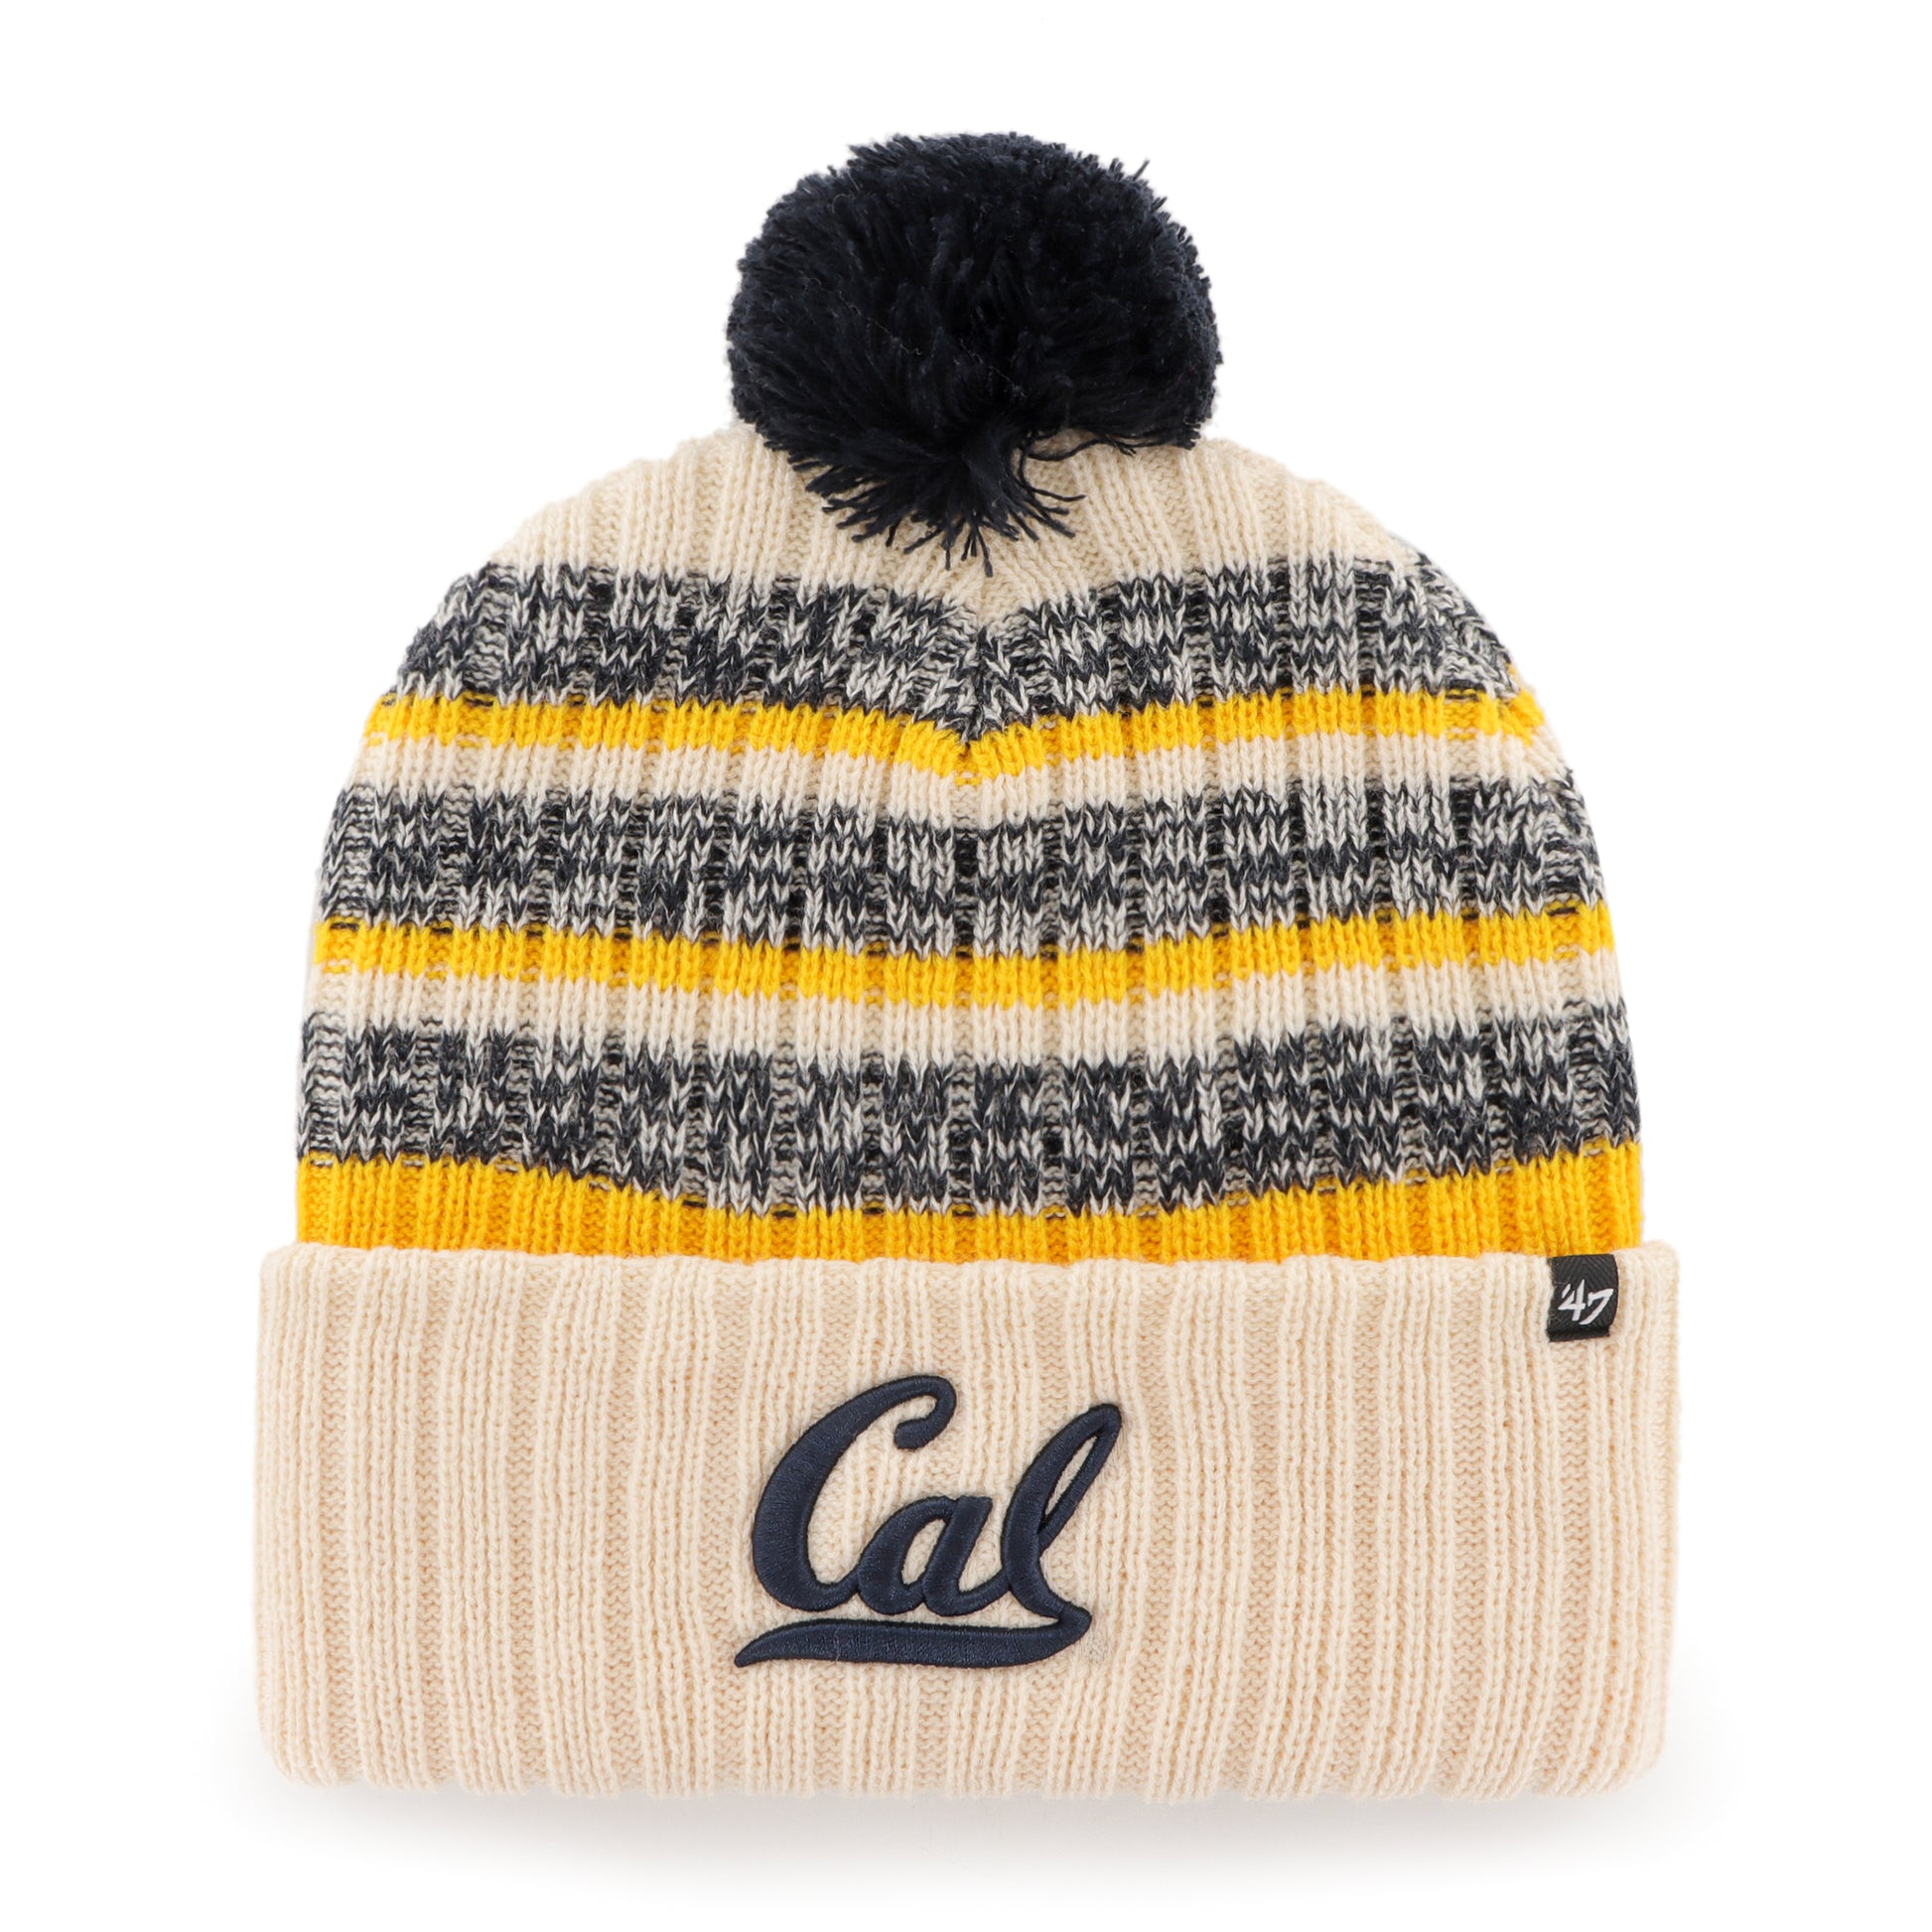 U.C. Berkeley Cal Bears team color stripe and natural cable knit cuff Pom beanie hat -Navy-Natural-Shop College Wear